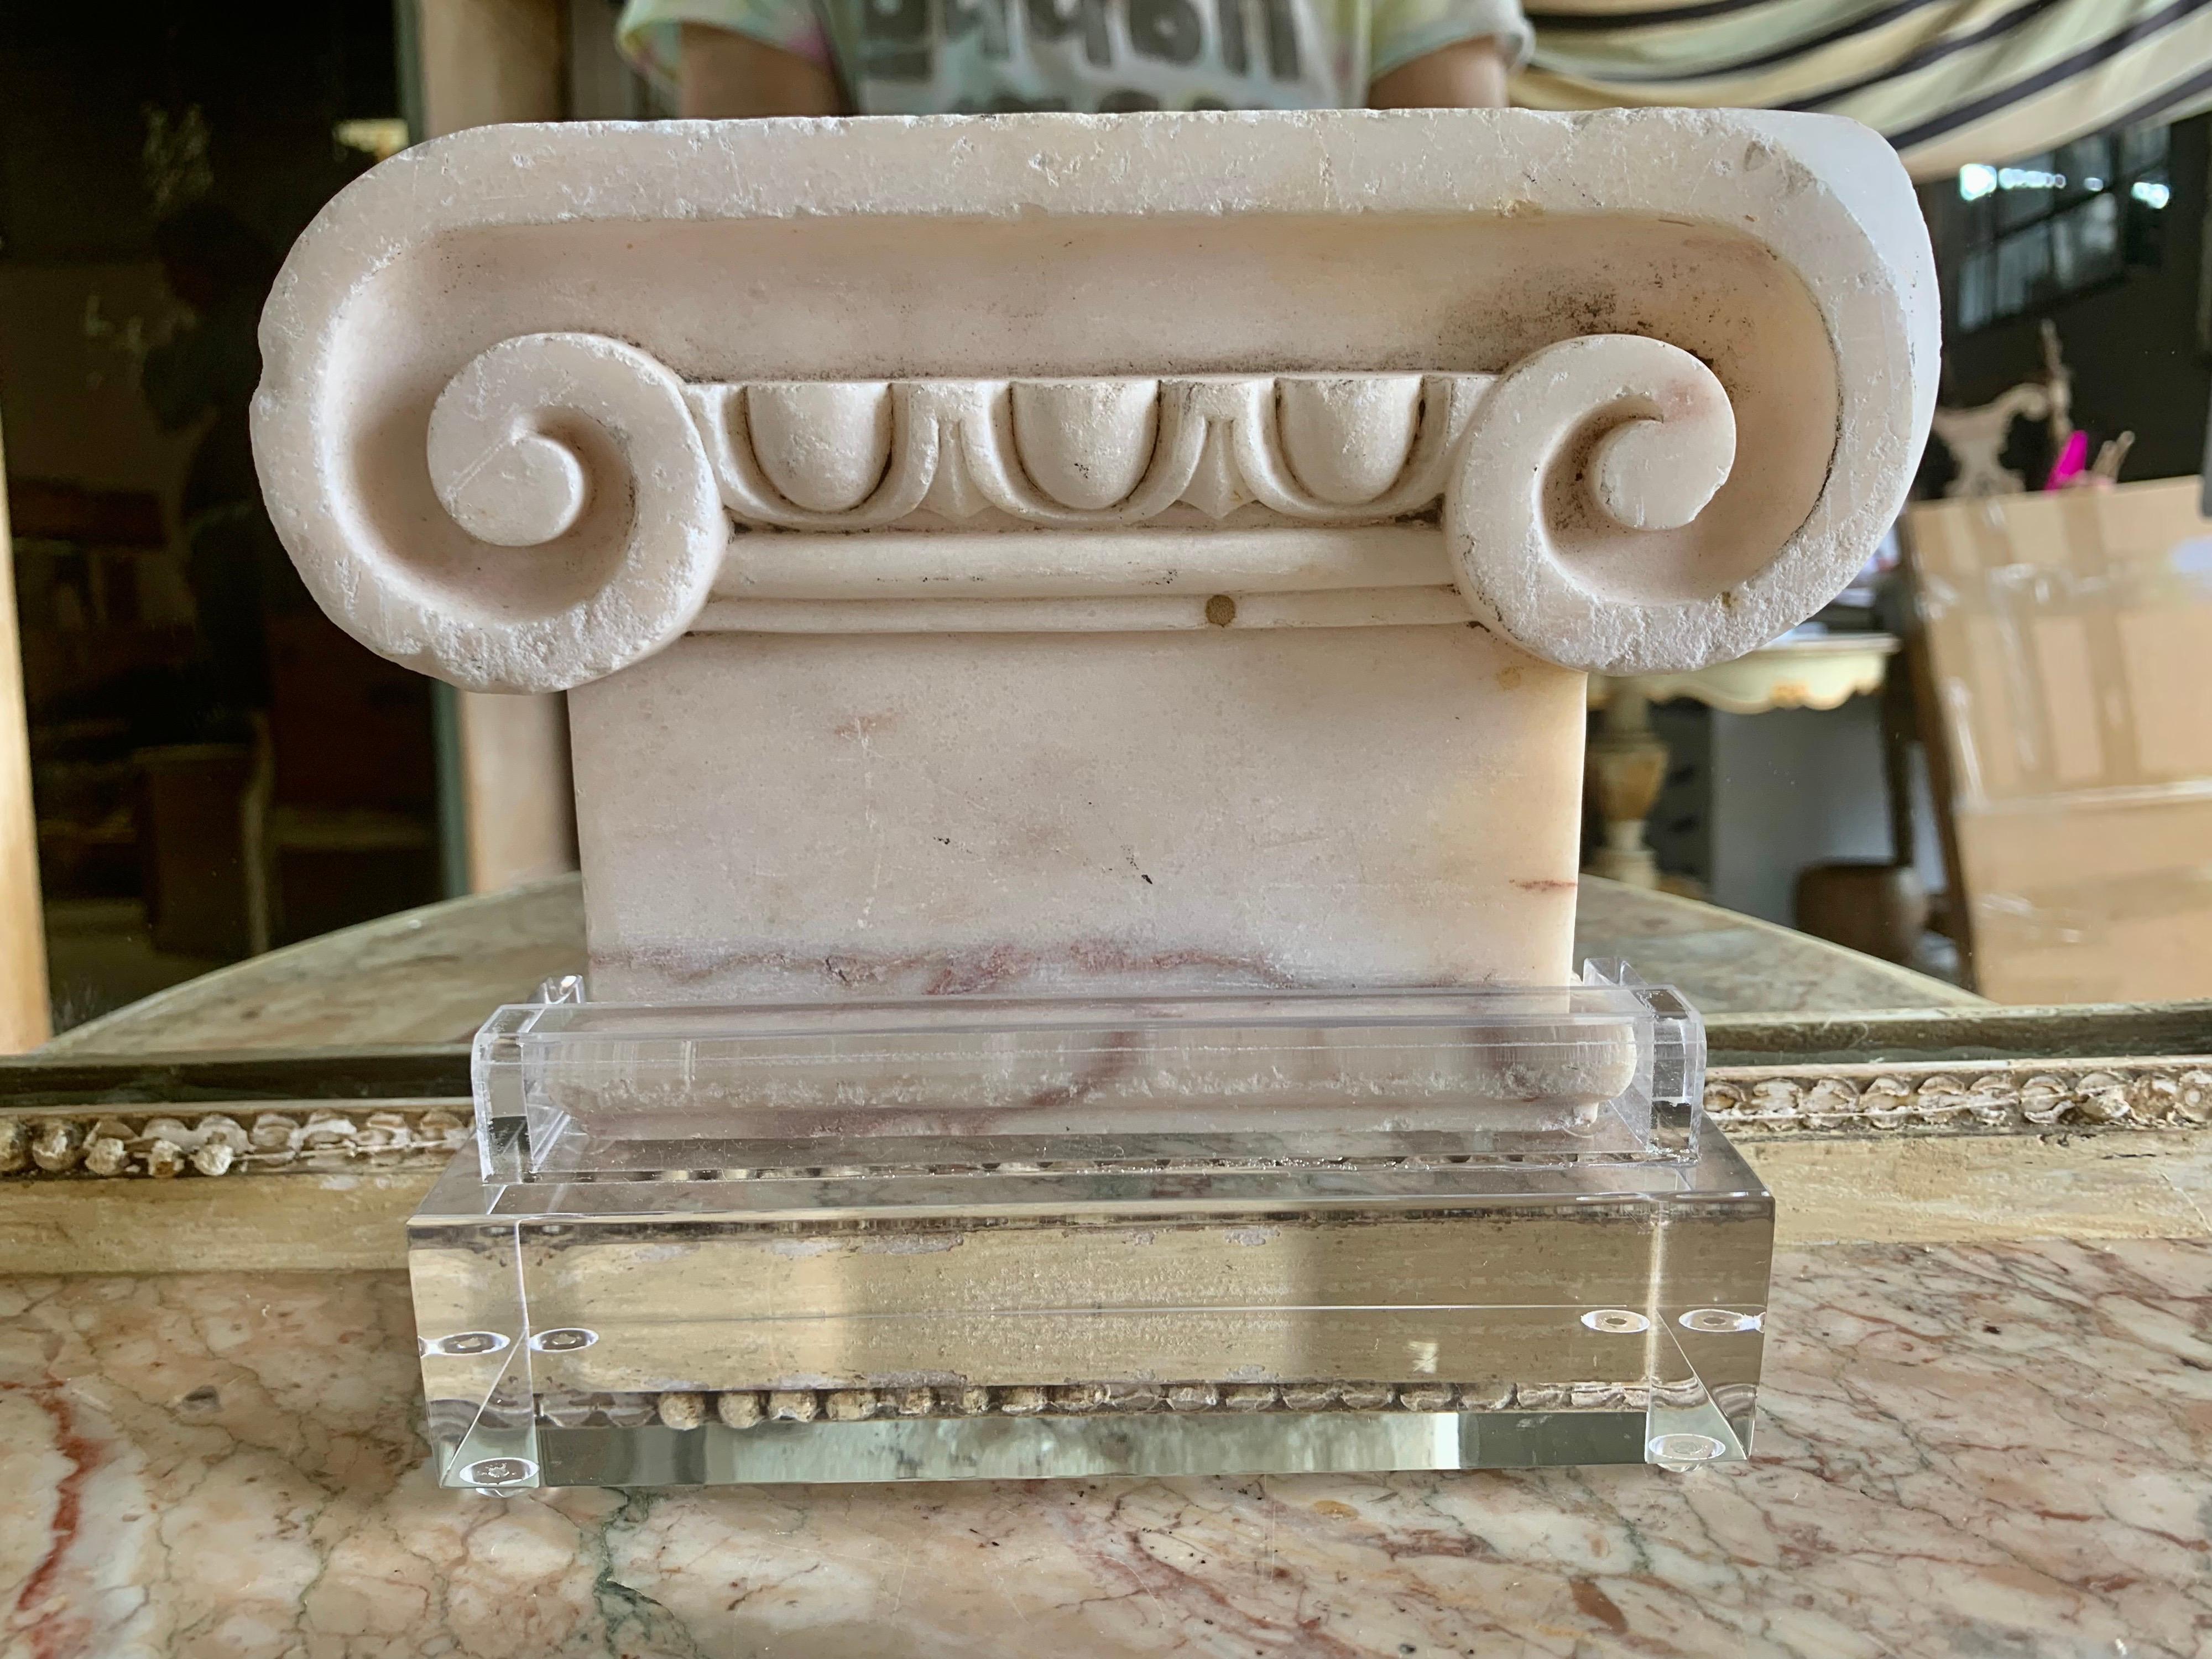 19th century carved marble Capital displayed on a lucite base. I purchased the Capital in Italy but it was made in France.